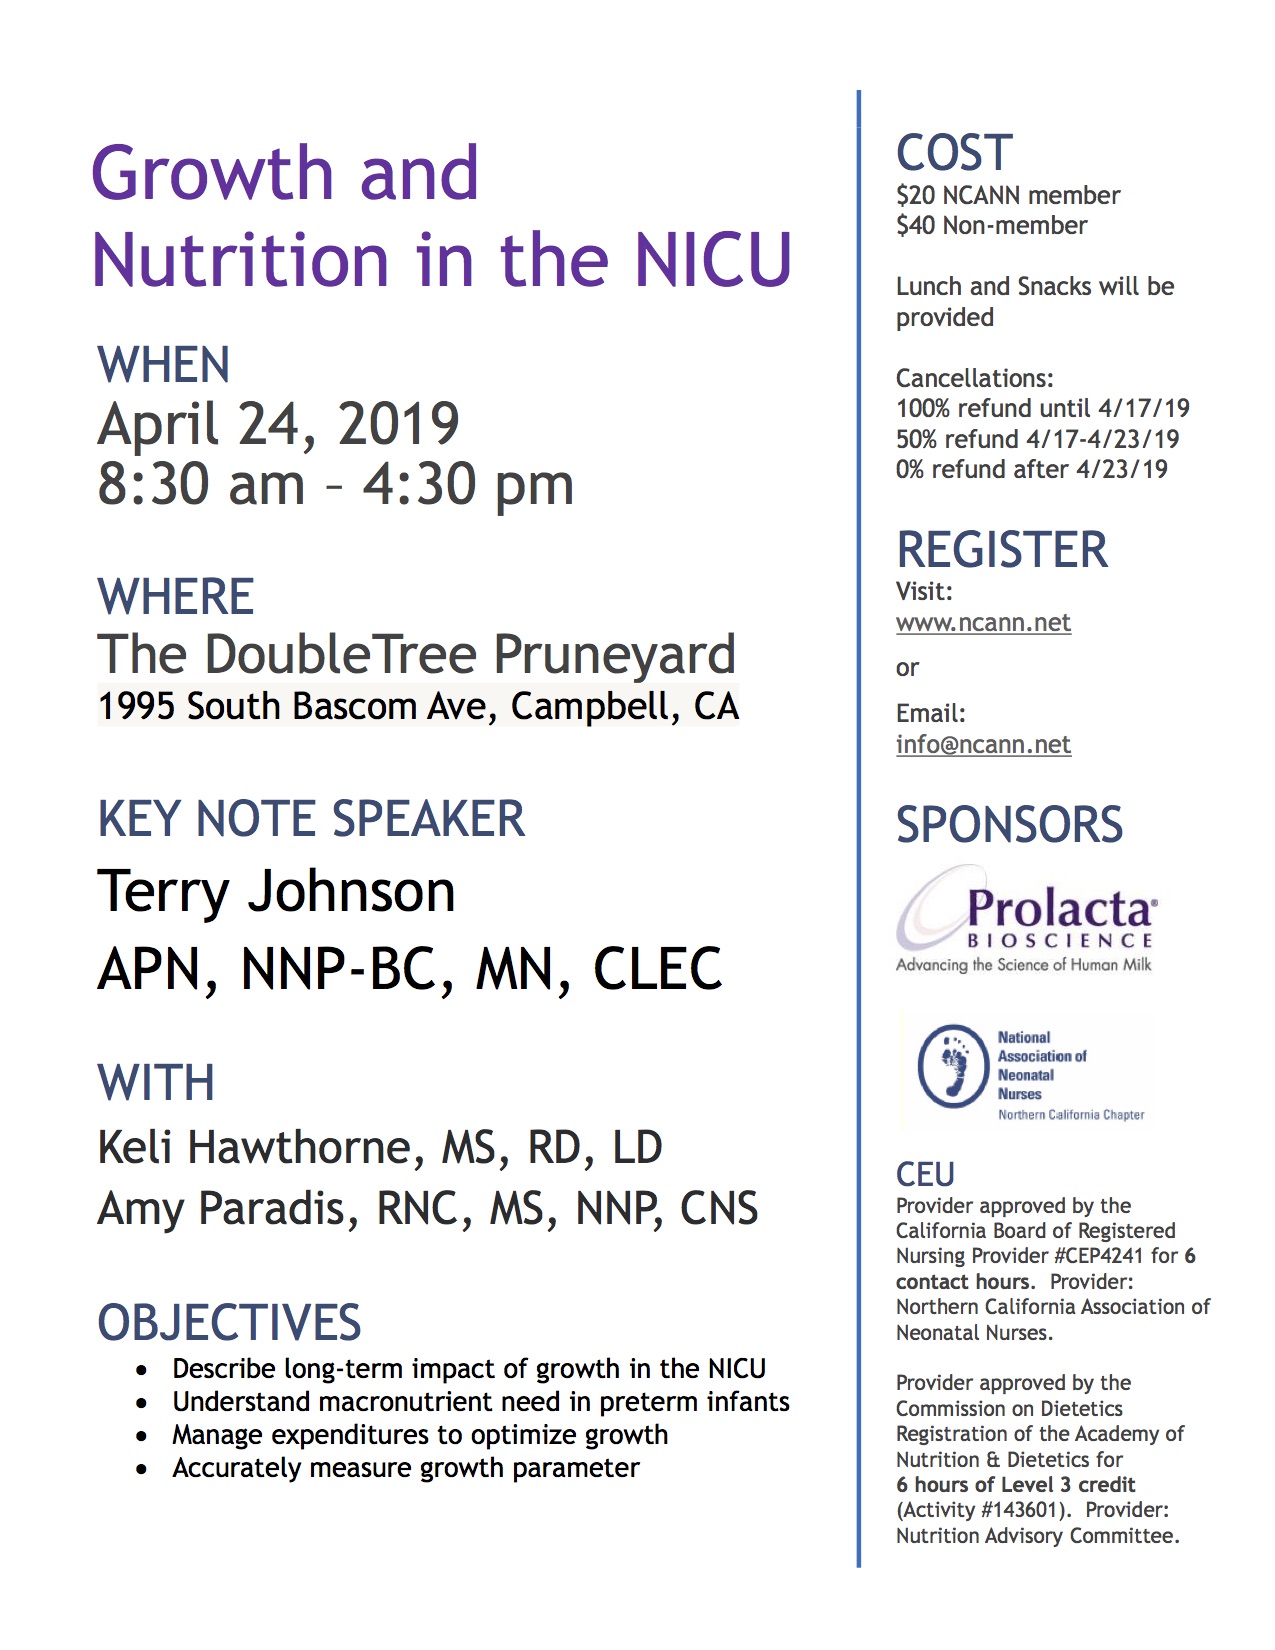 2019 April Growth and Nutrition in the NICU Prolacta and NCANN Event